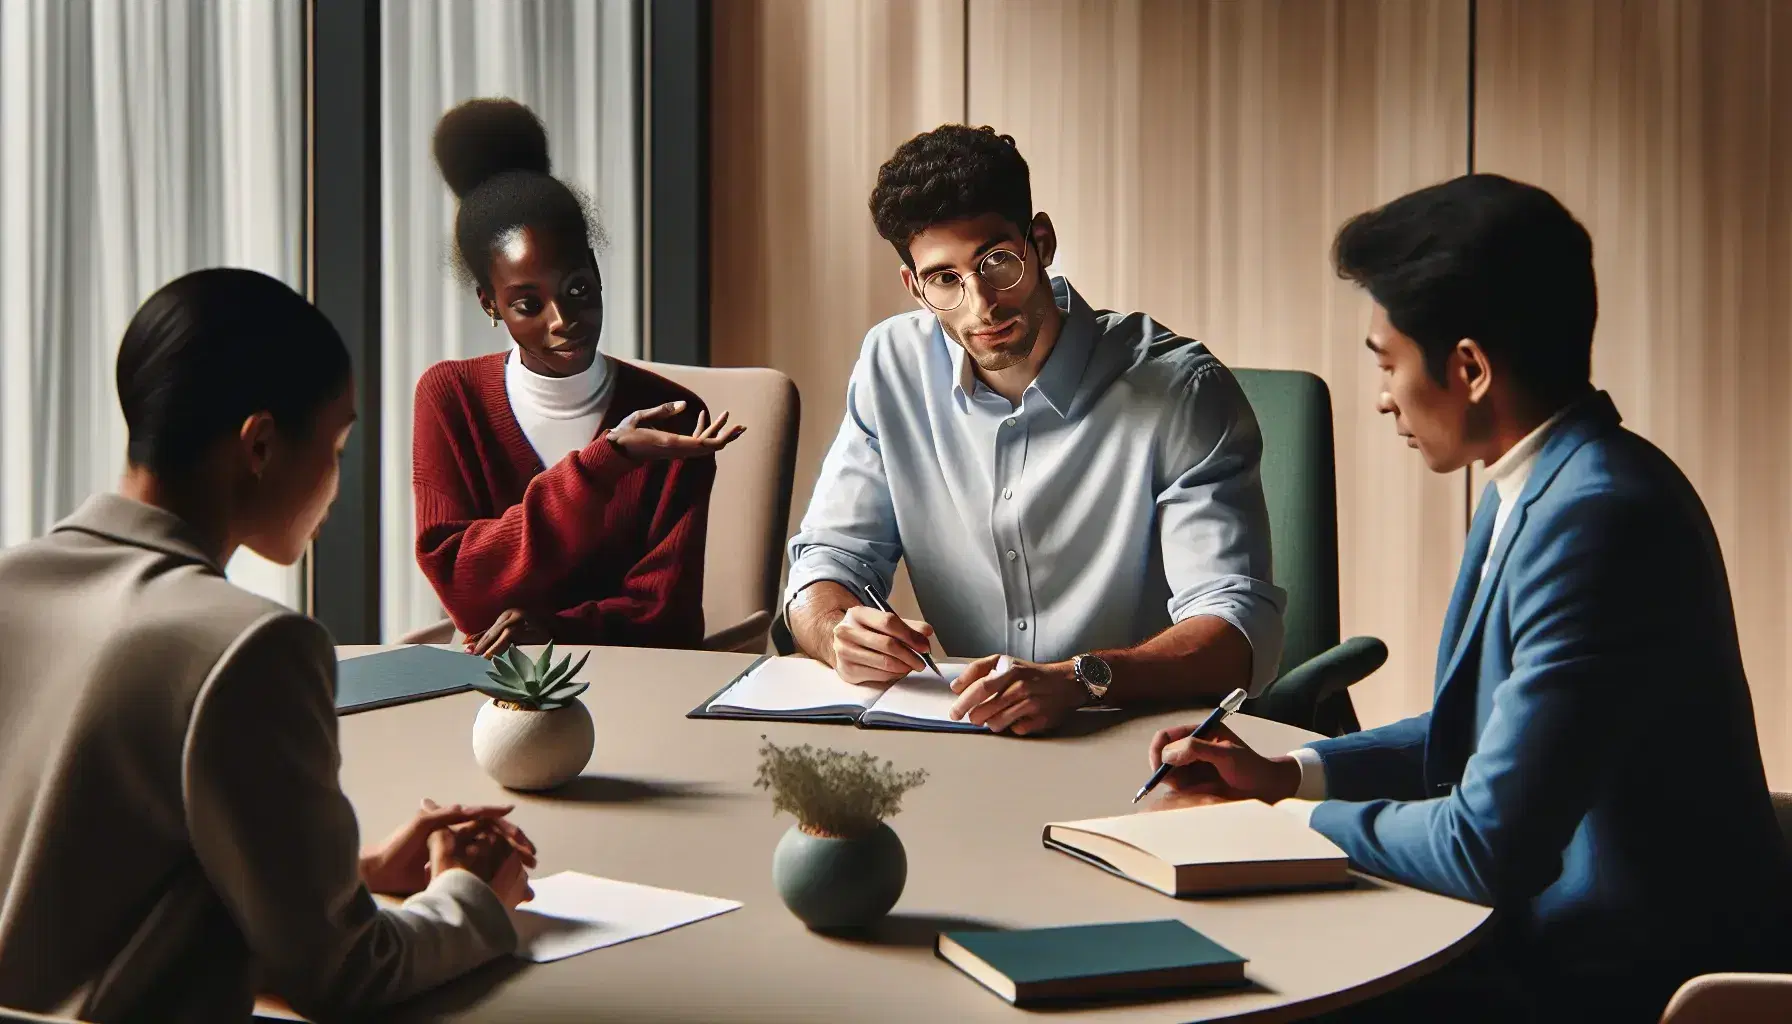 Diverse team in a meeting: Hispanic man taking notes, Black woman talking, Middle-Eastern and South Asian colleagues listening, Caucasian woman with plant.